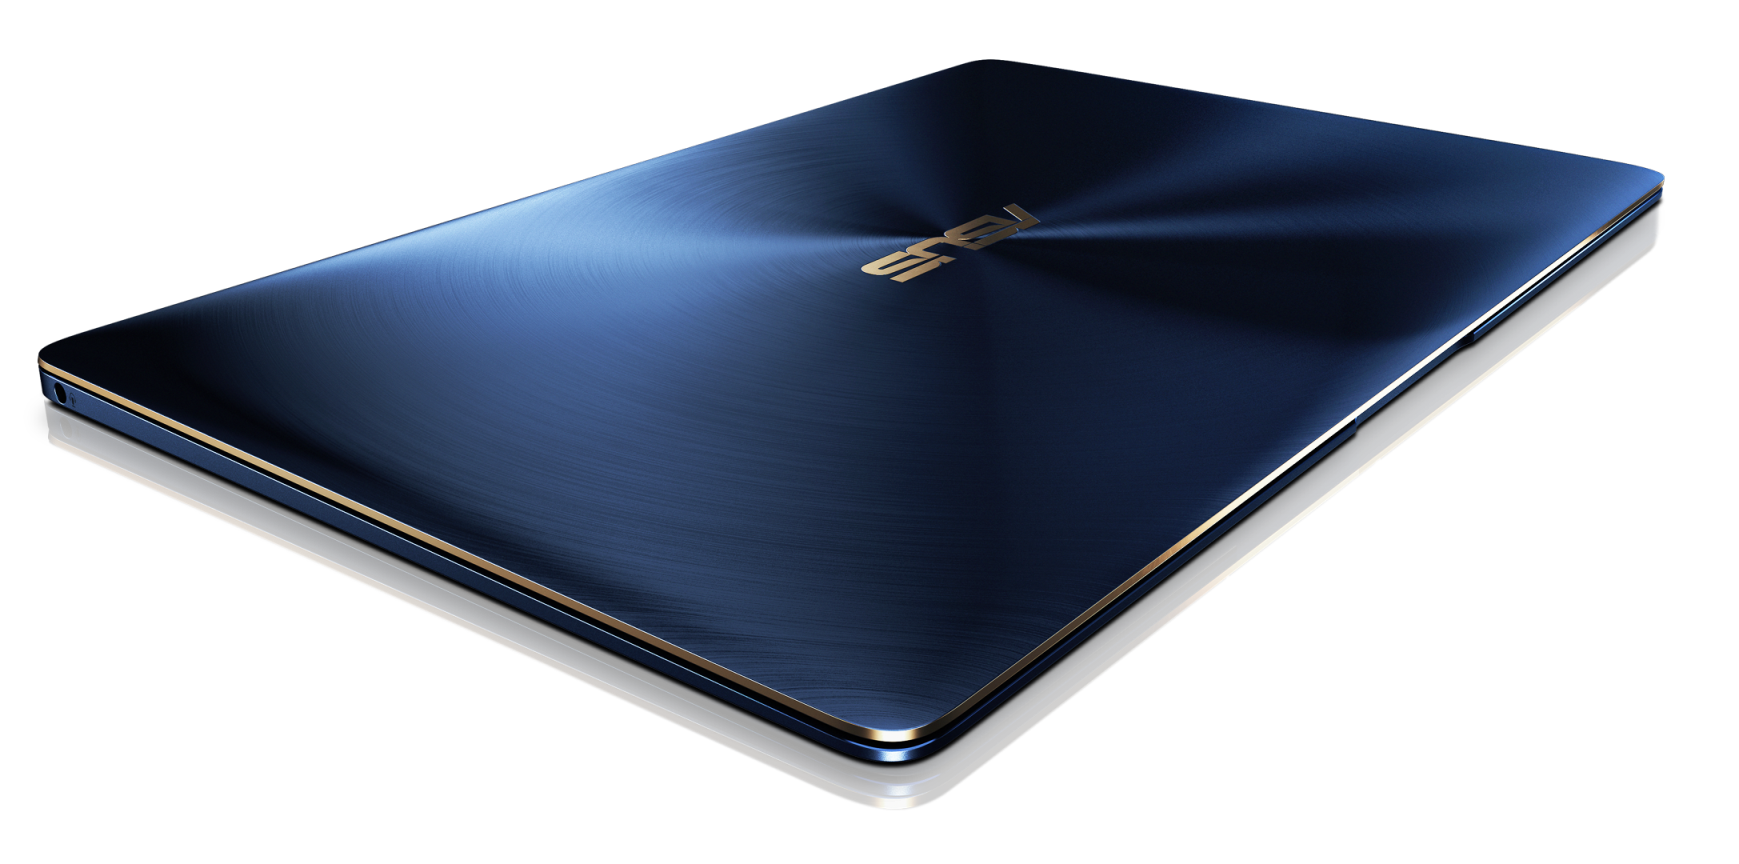 ASUS Announces the Zenbook 3: A Macbook Competitor with Core i7